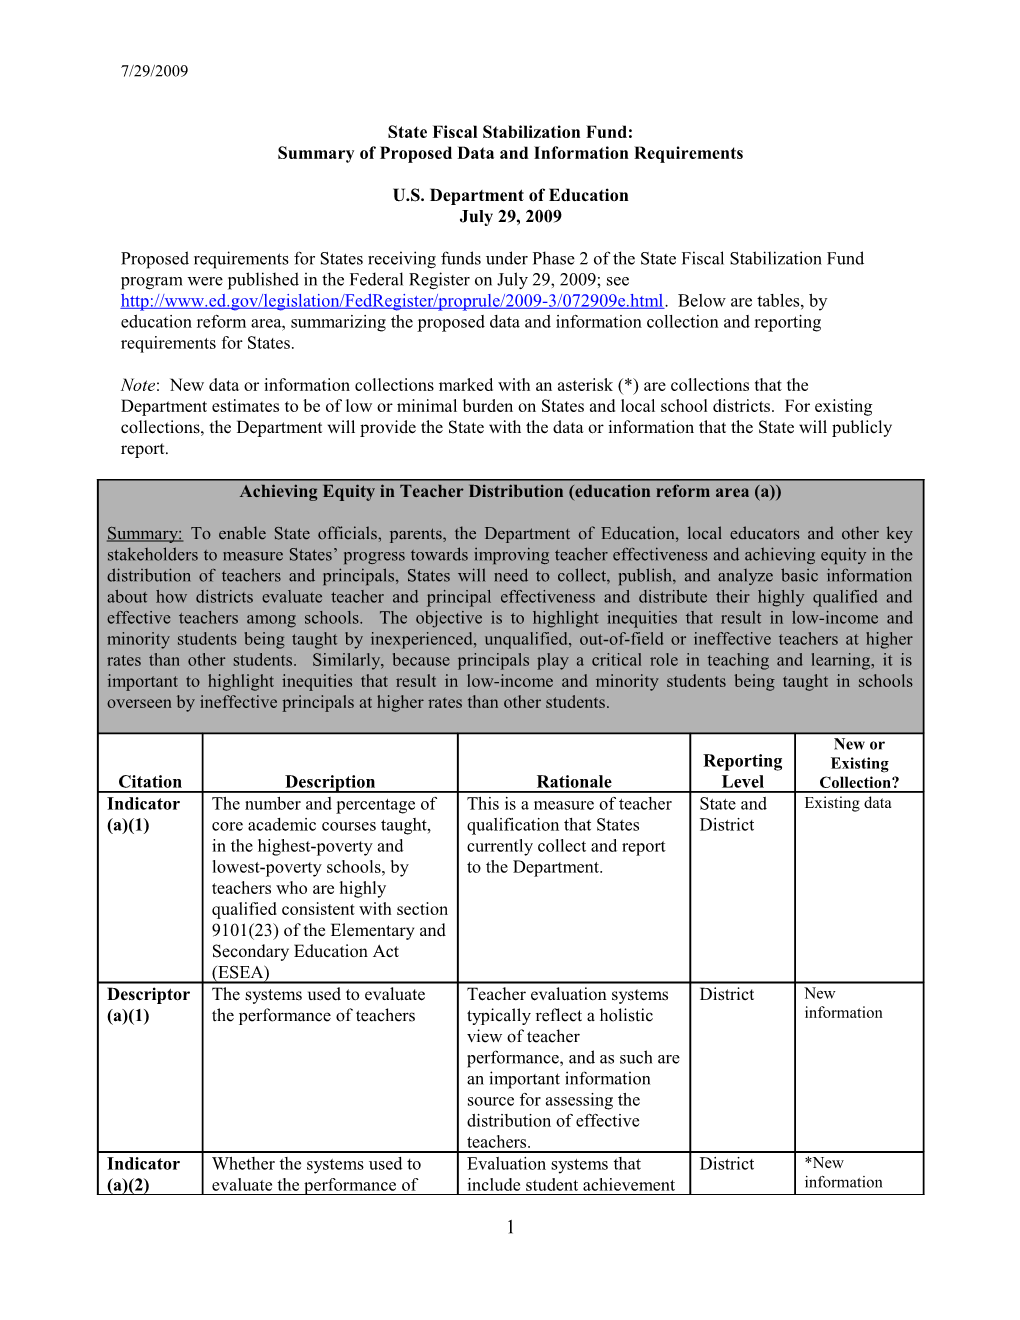 State Fiscal Stabilization Fund: Tables of Proposed Requirements August 2009 (Msword)